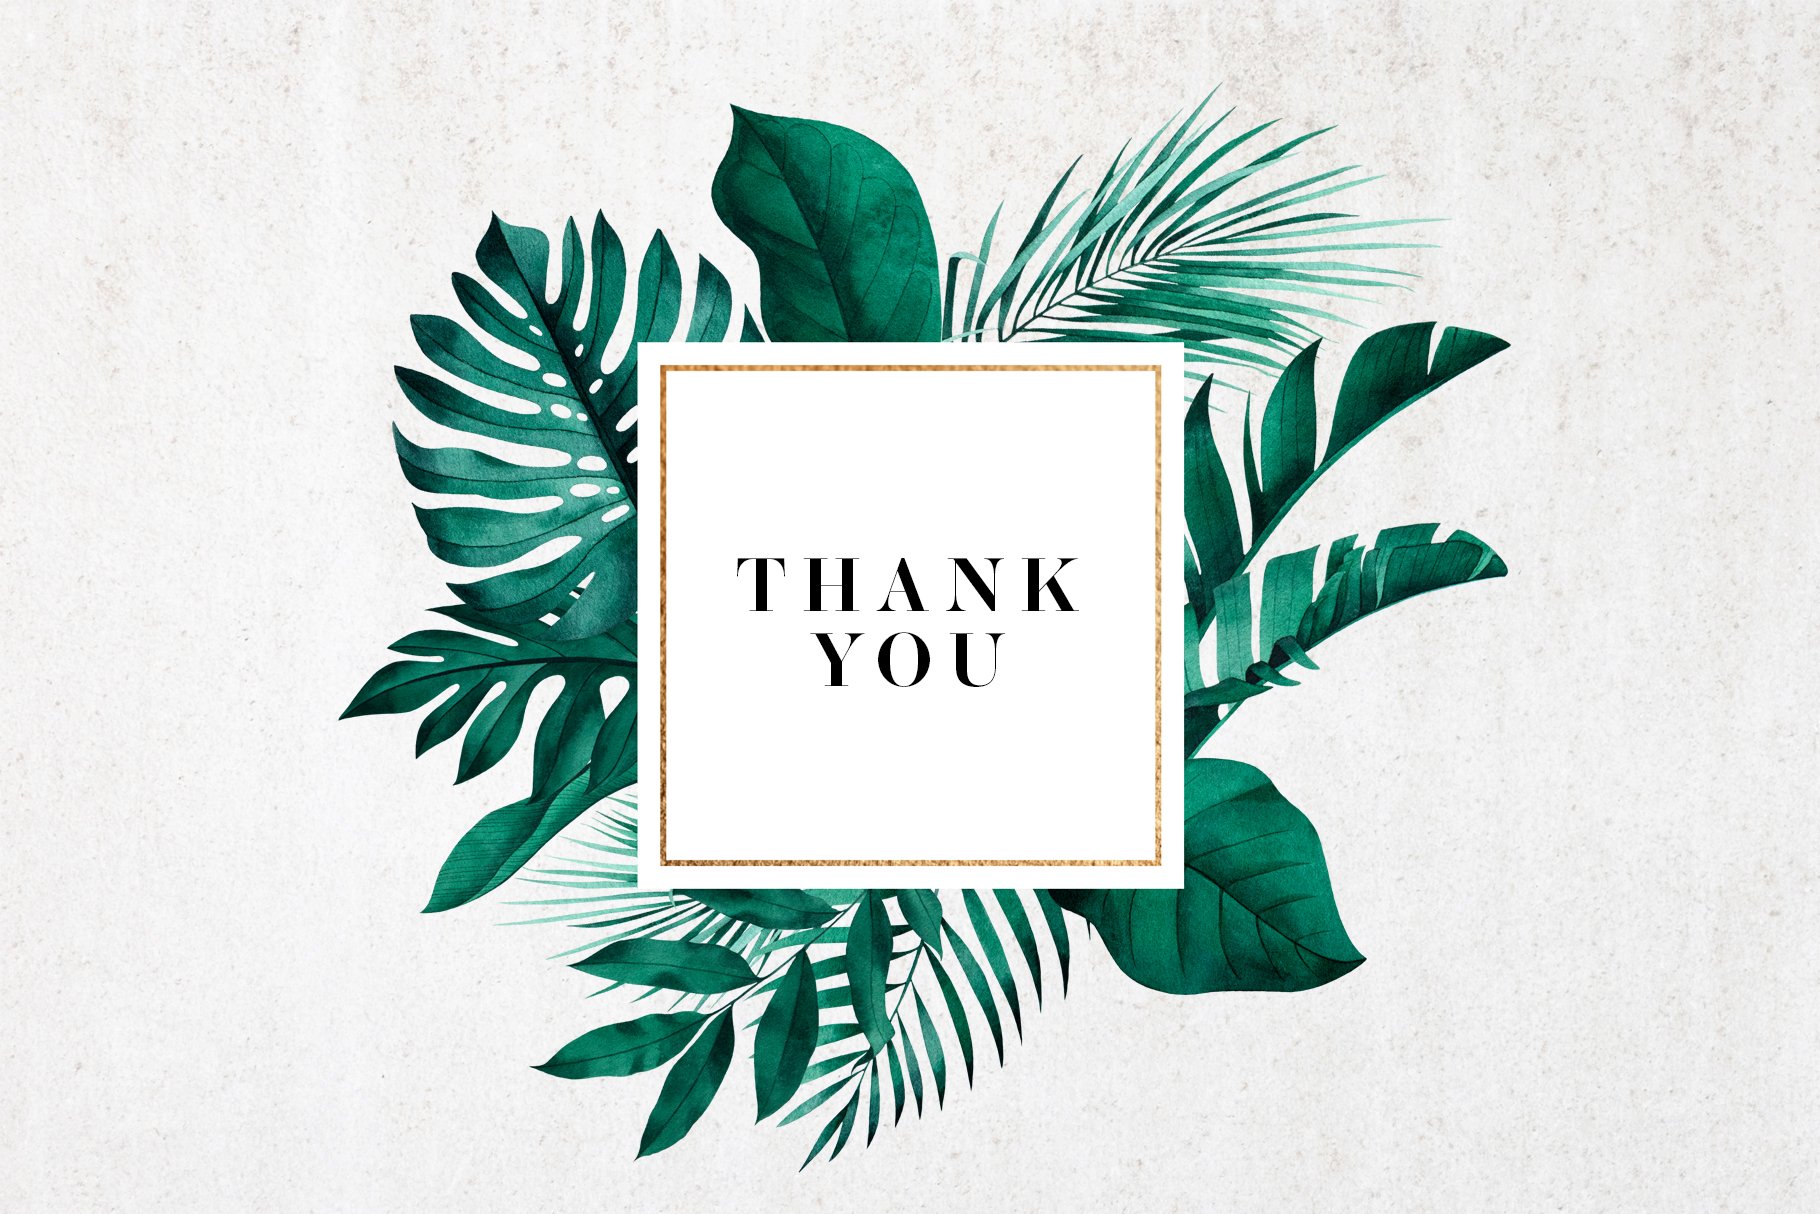 Thank card with green leaves on a white background.